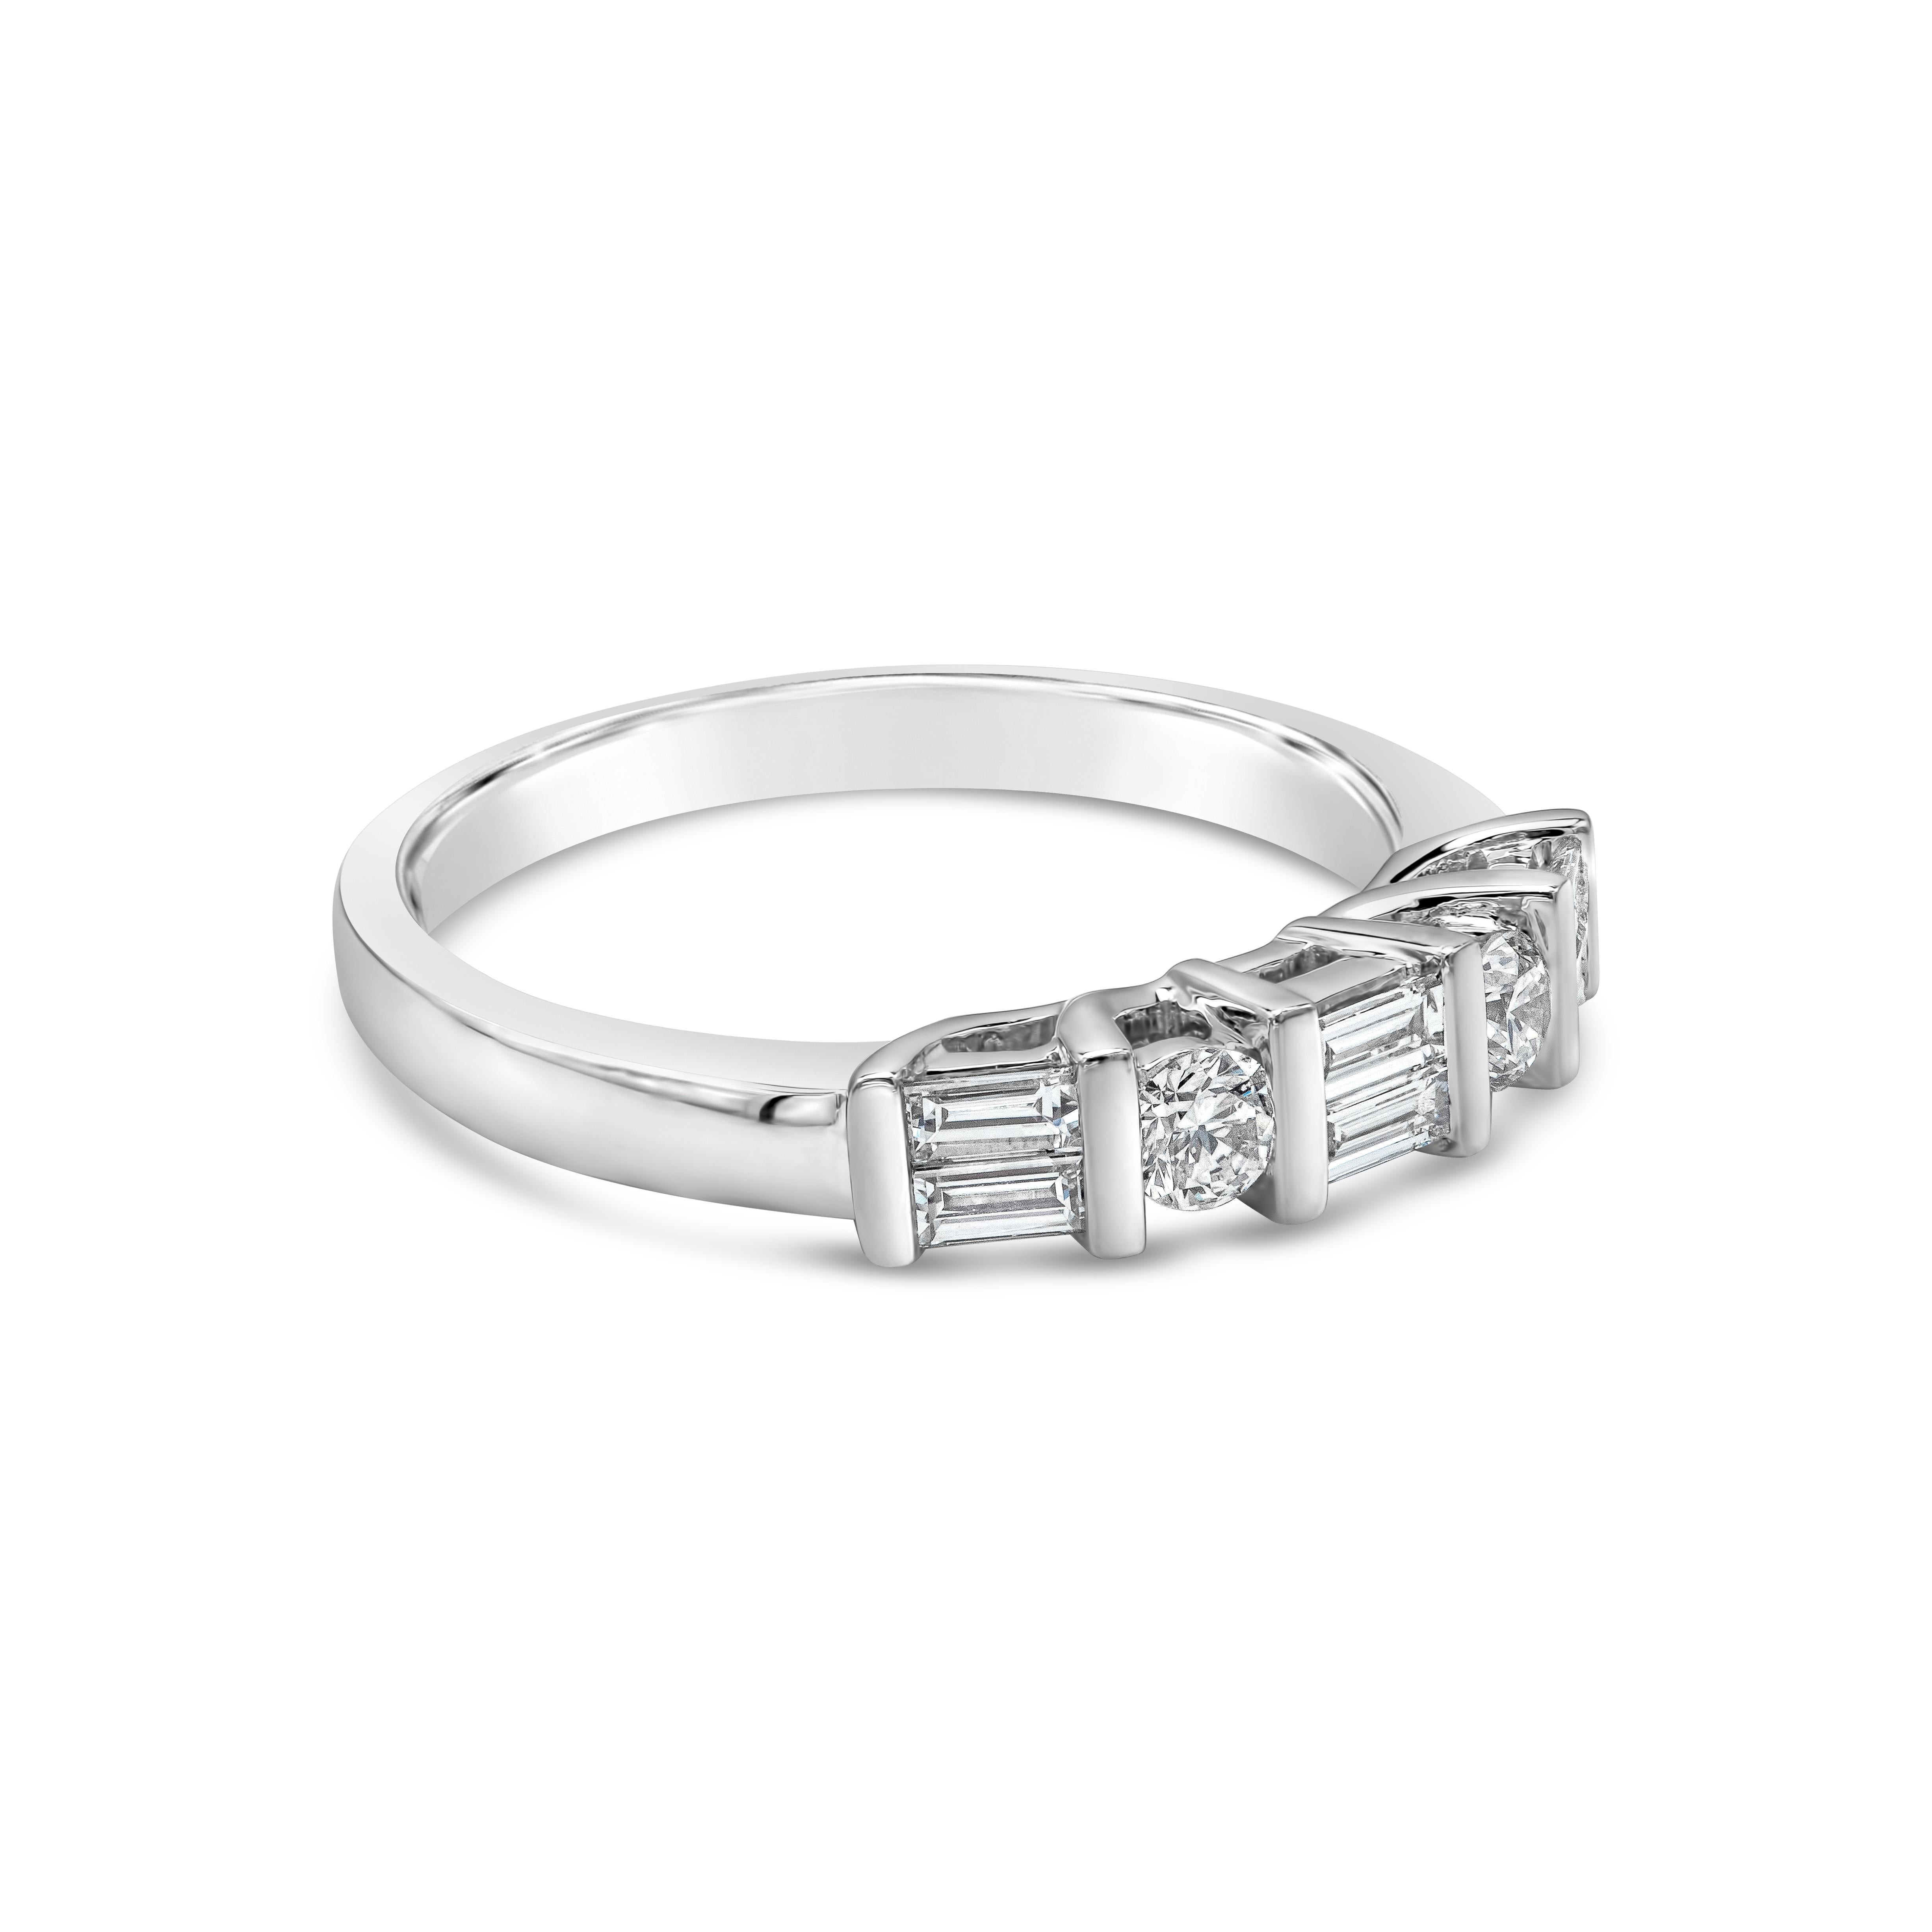 Features a five stone wedding band ring with baguette diamonds weighing 0.33 carats, elegantly alternates with round diamonds weighing 0.19 carats. Bar set, Made in 18K White Gold. Size 6.5 US resizable upon request.

Roman Malakov is a custom